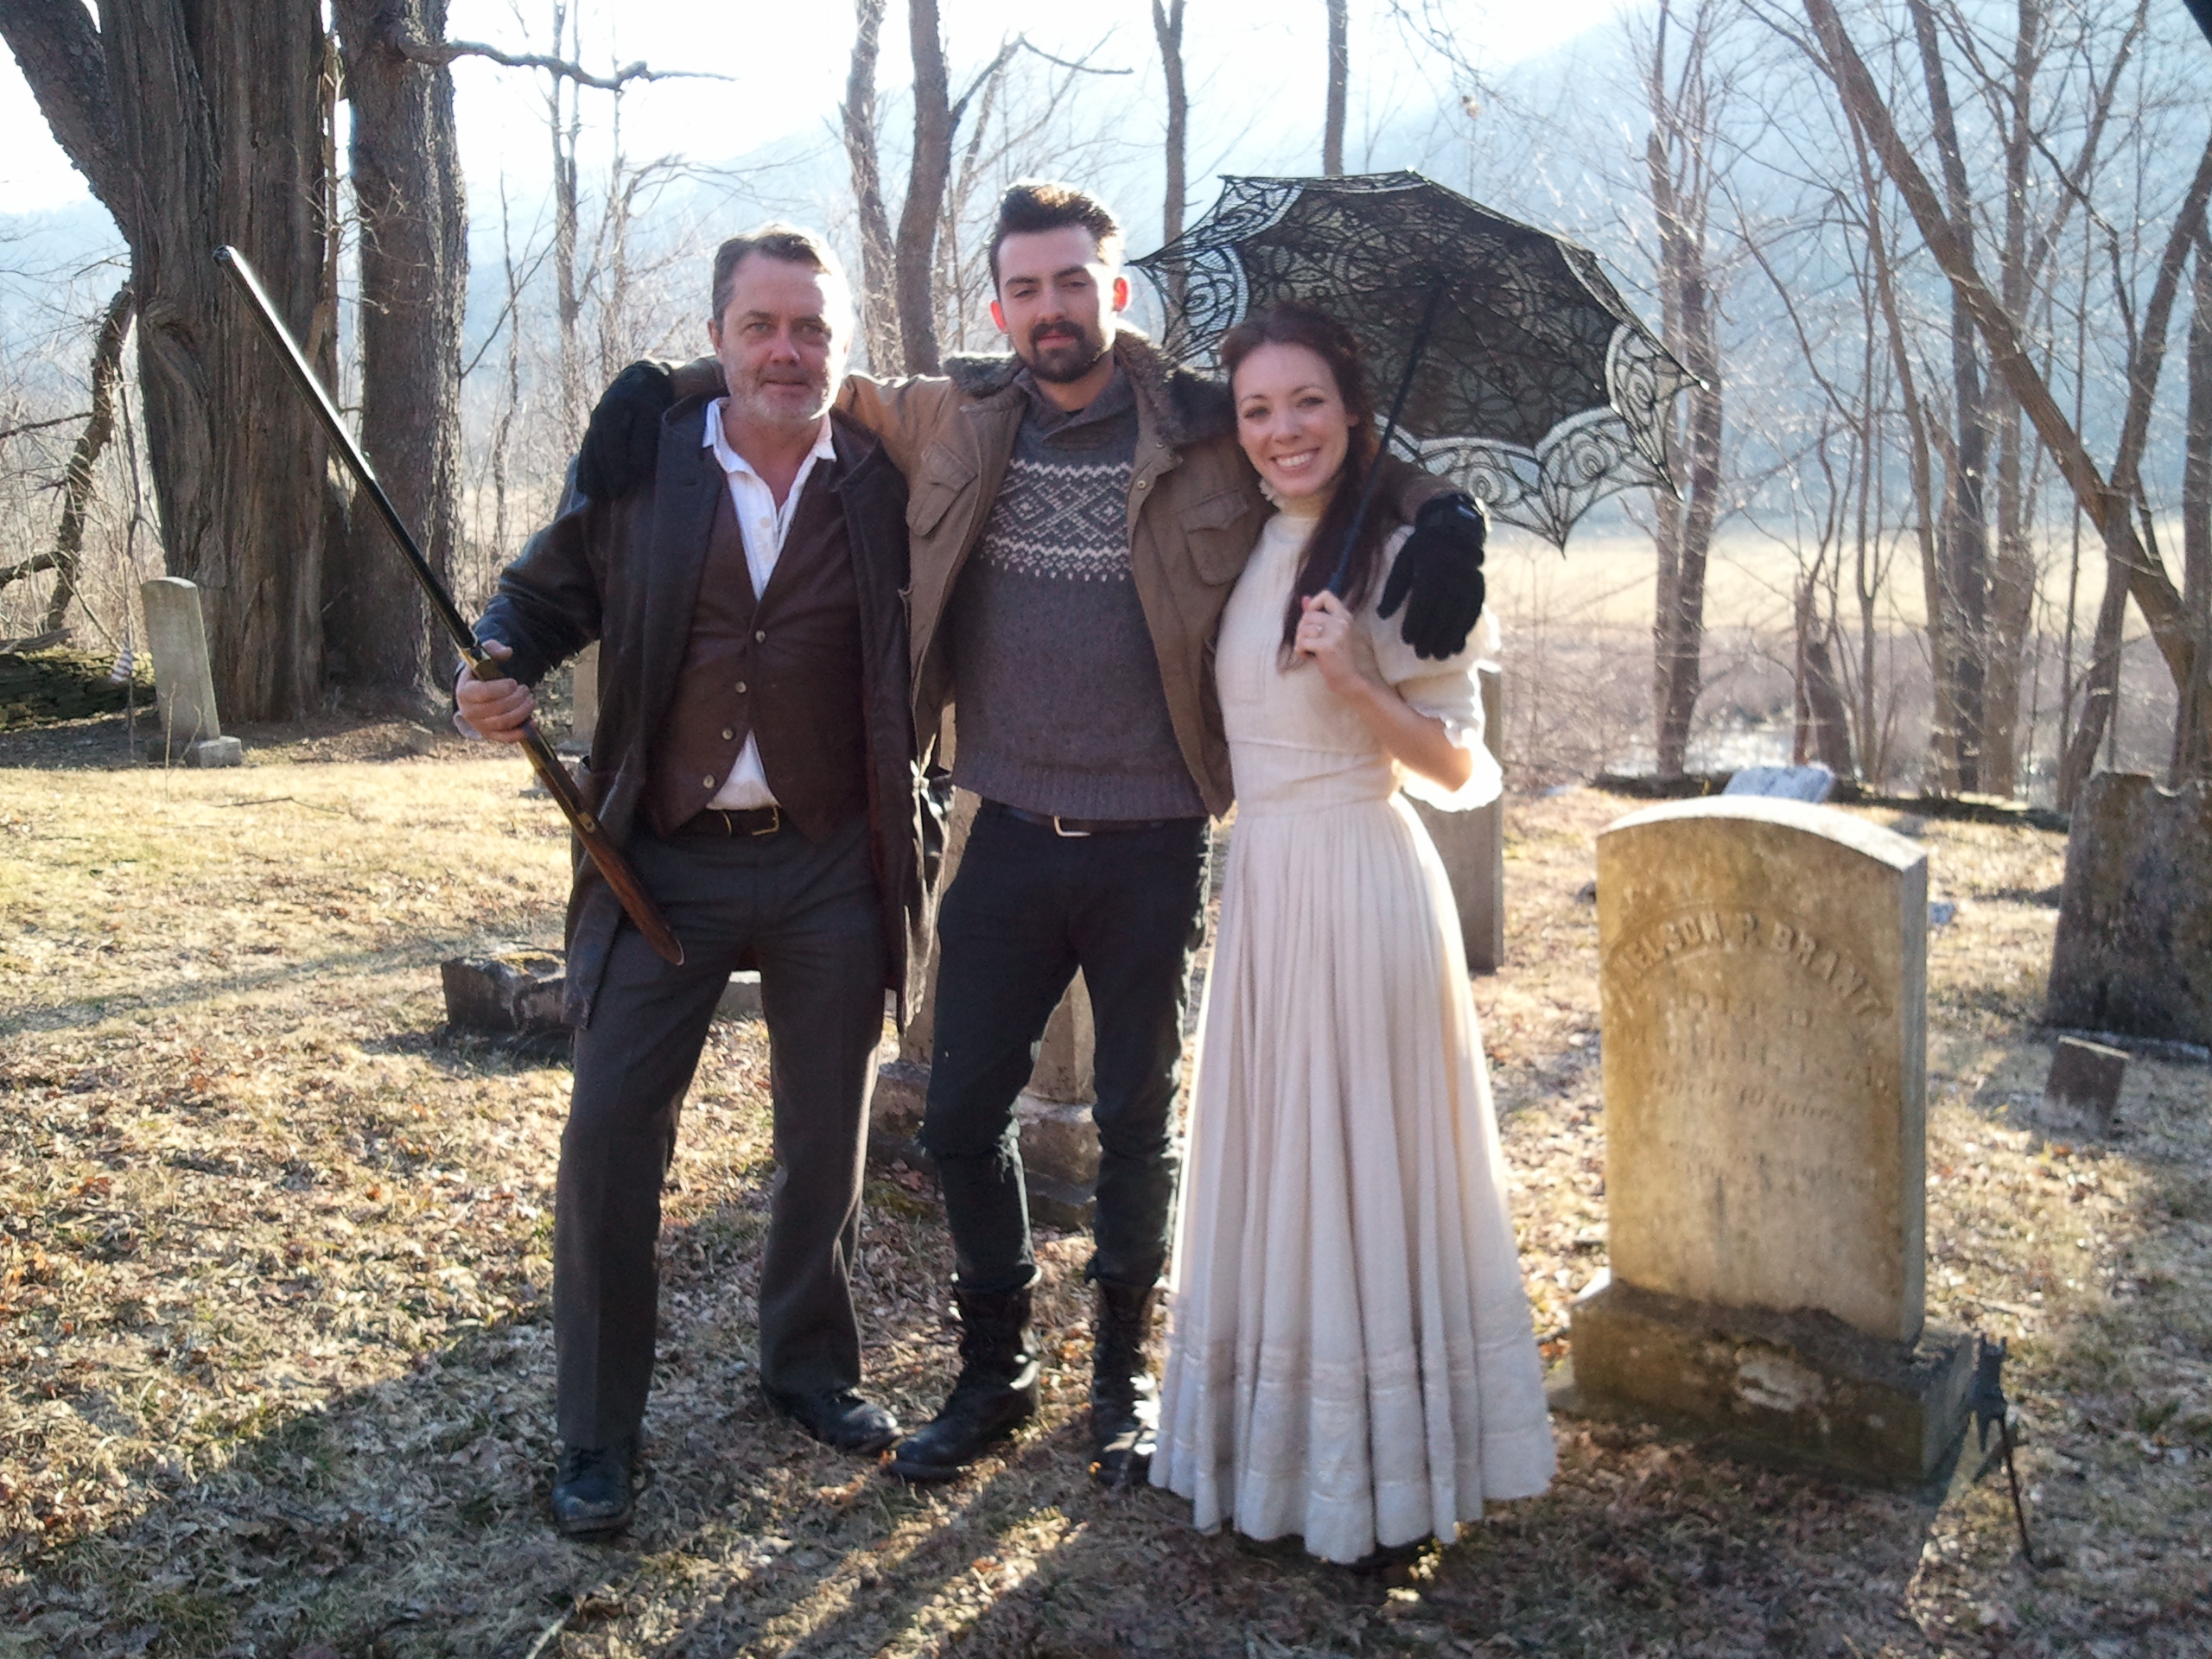 behind the scenes with director Philippe Grenade-Willis (center) and co star Amber Ford (right) for Silent Rider's music video for 